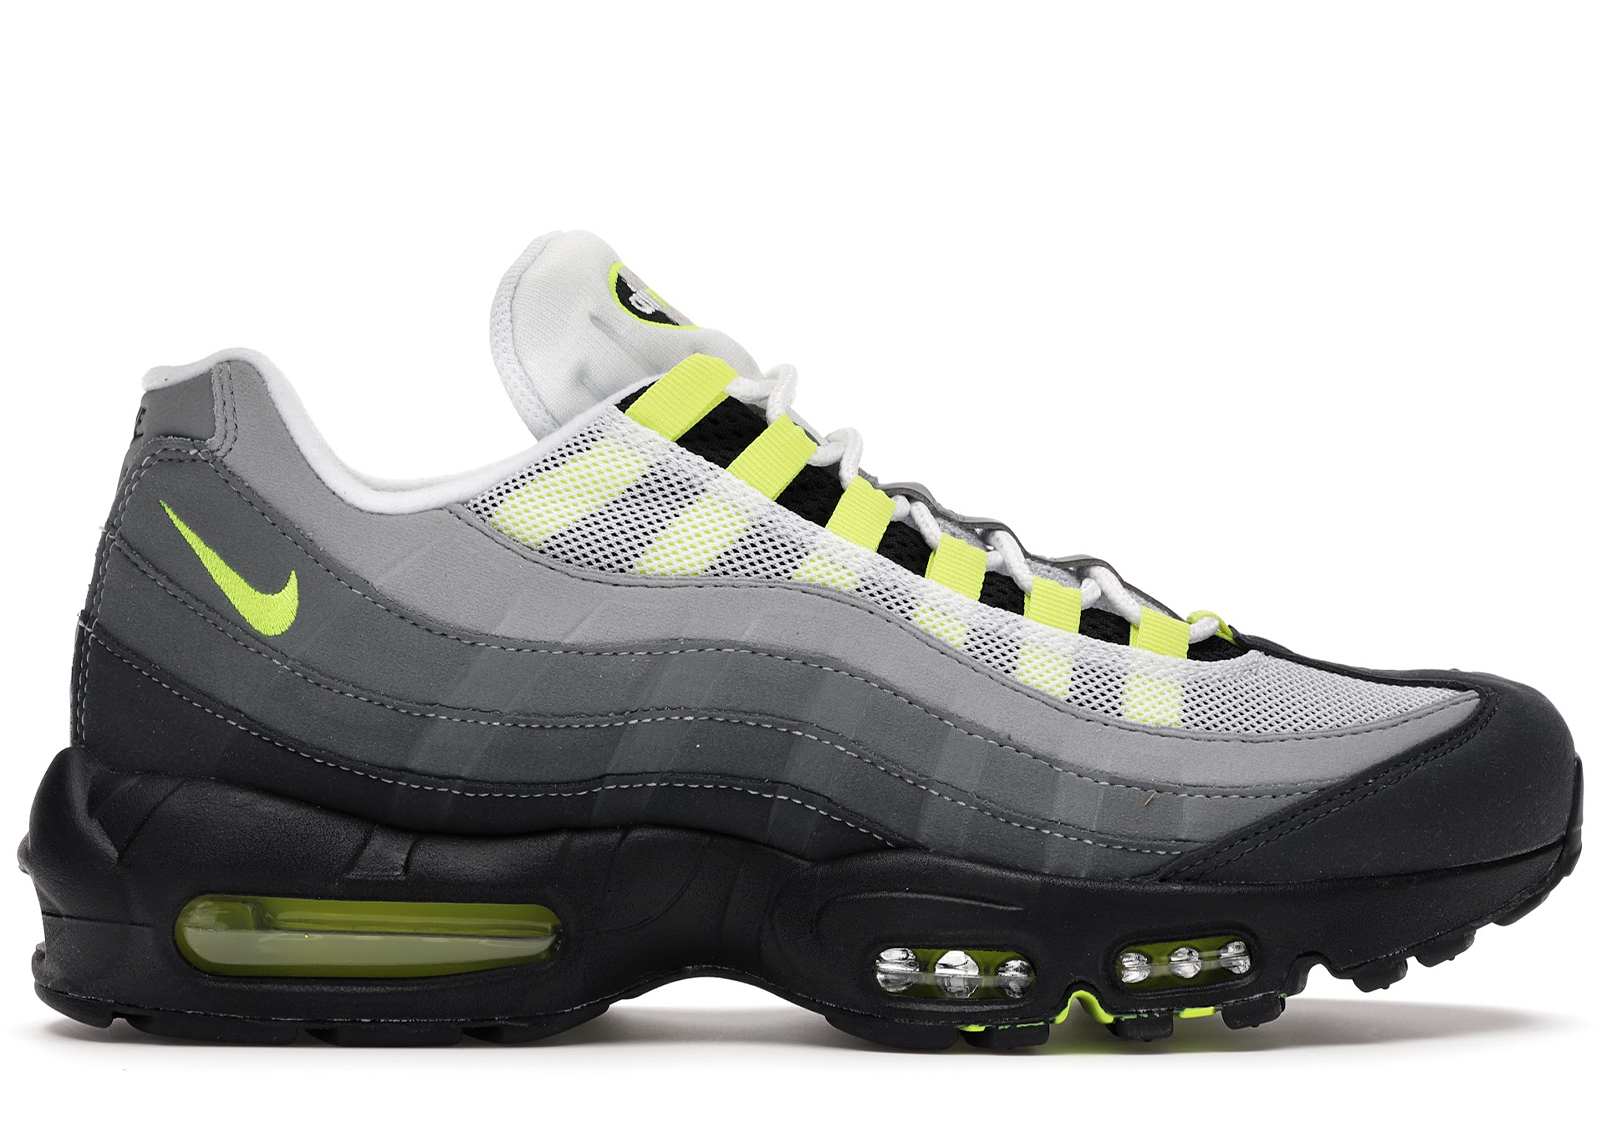 Buy Nike Air Max 95 Size 14 Shoes & Deadstock Sneakers رسم حروف مزخرفه